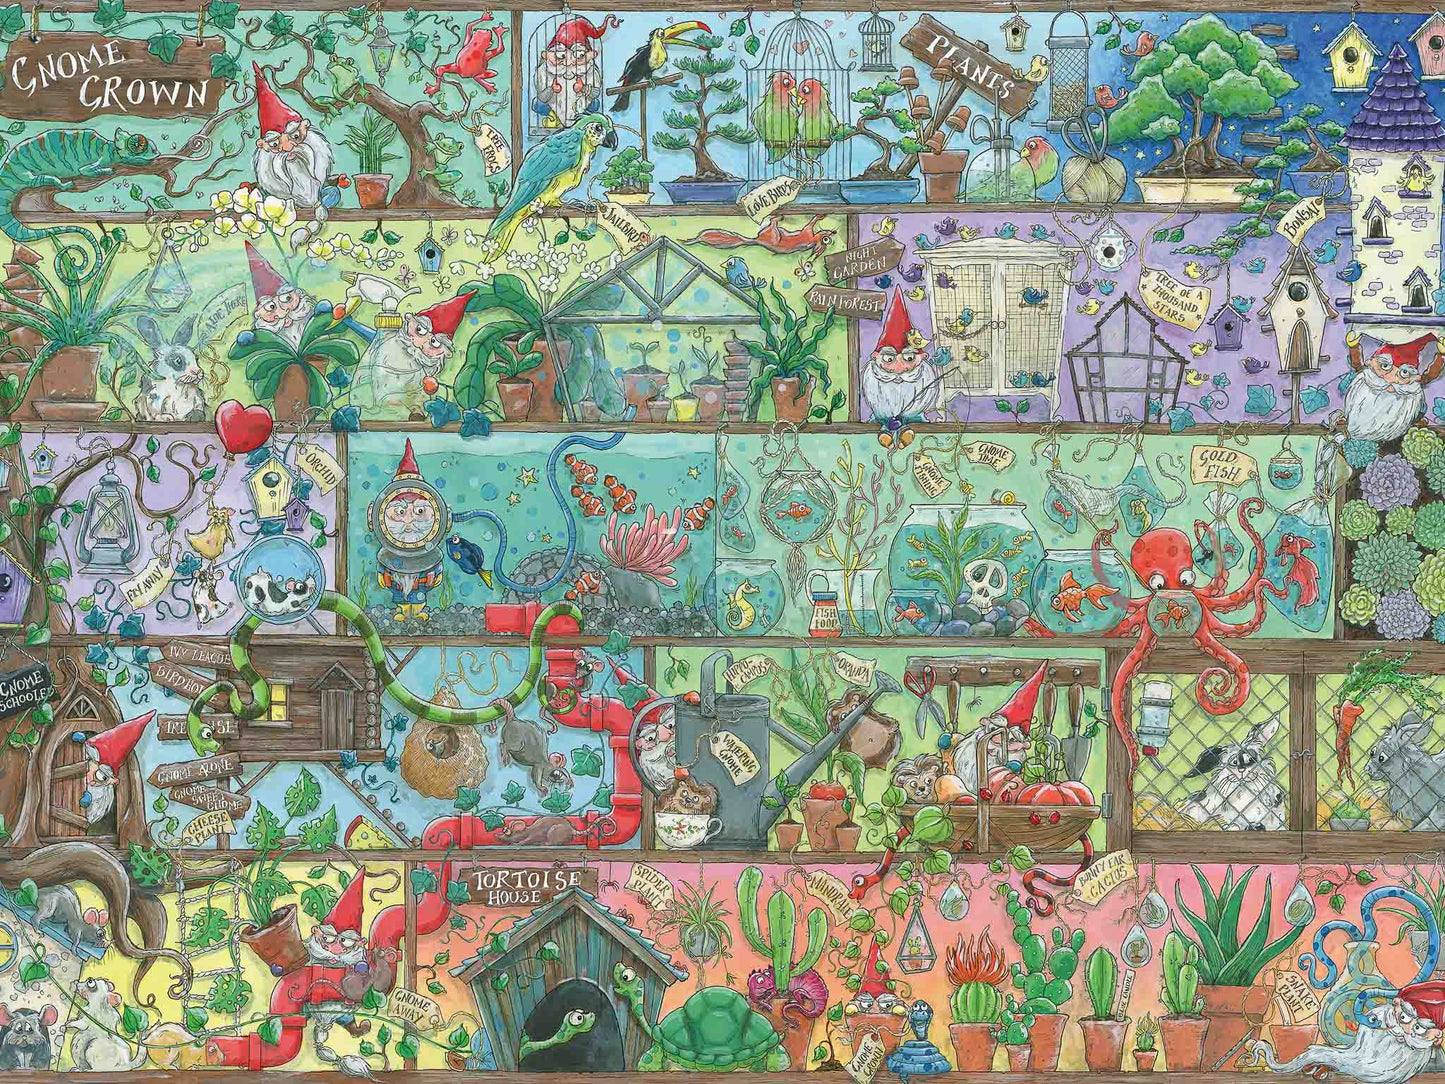 Ravensburger Gnome Grown 1500 Piece Jigsaw Puzzle High Quality Buy or Rent